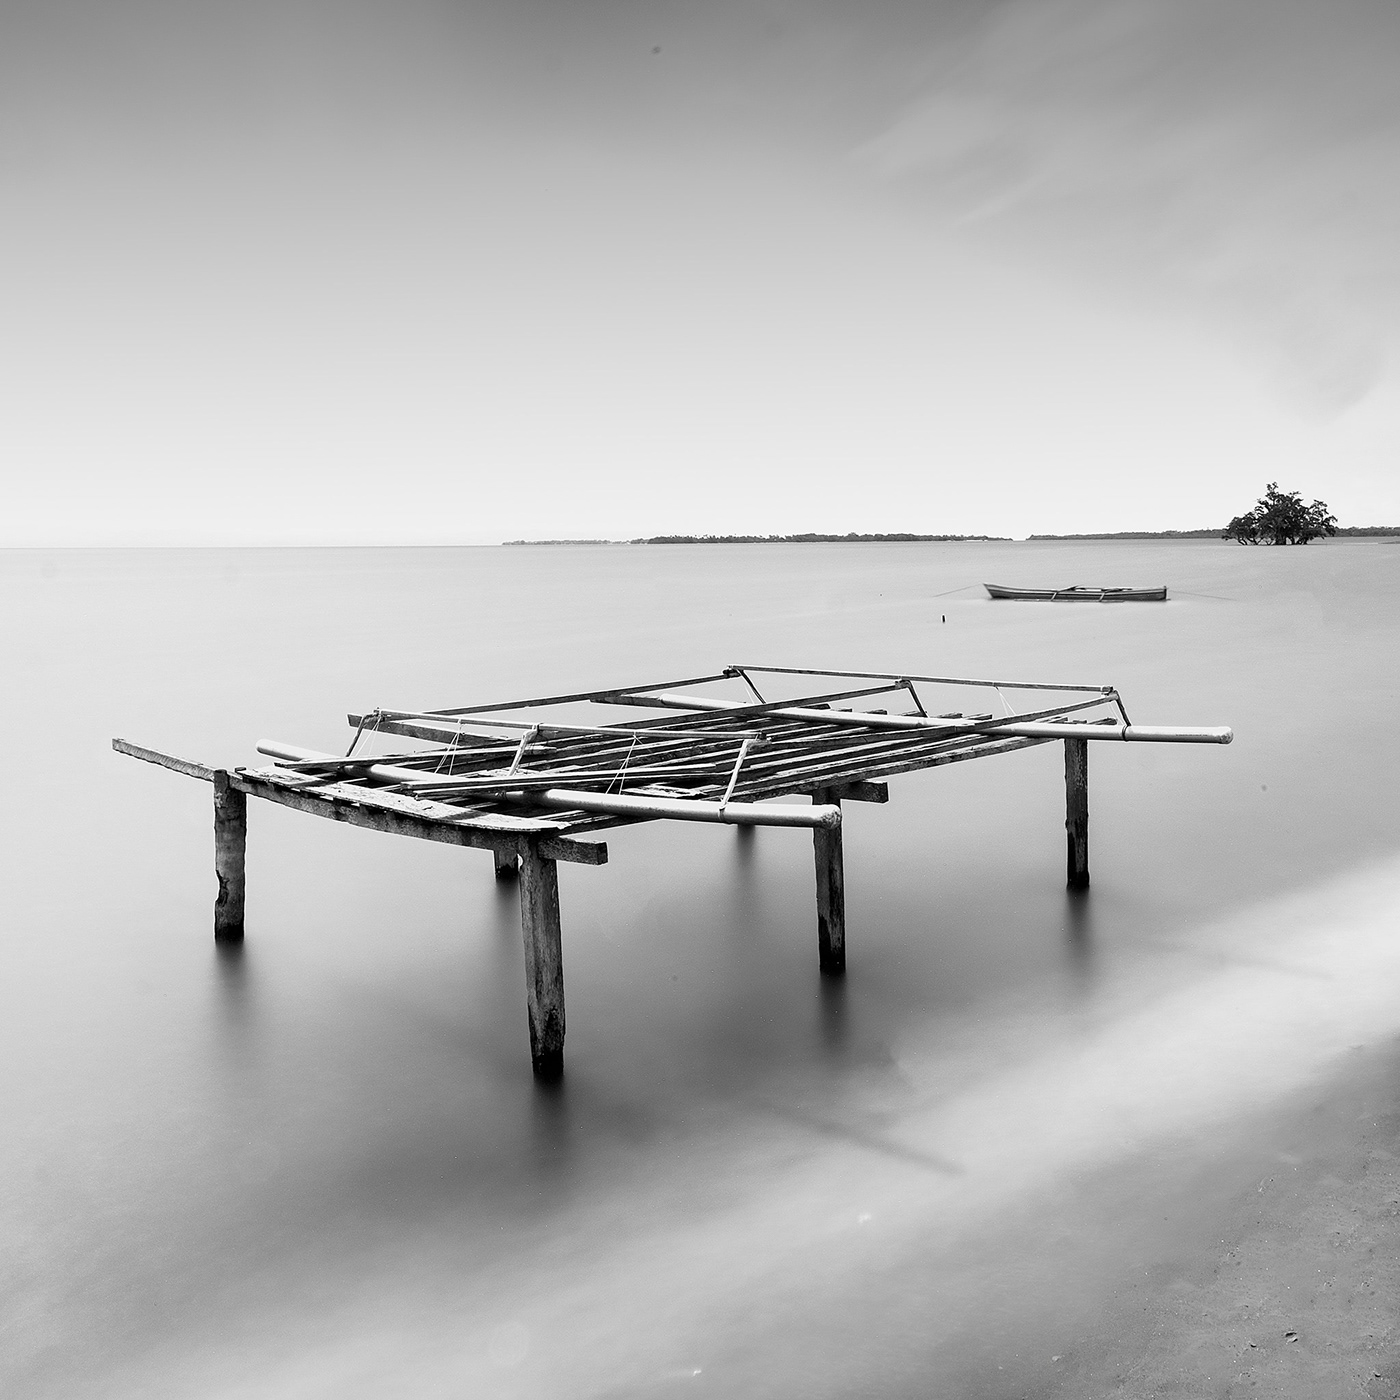 Landscaped long exposures Photography 